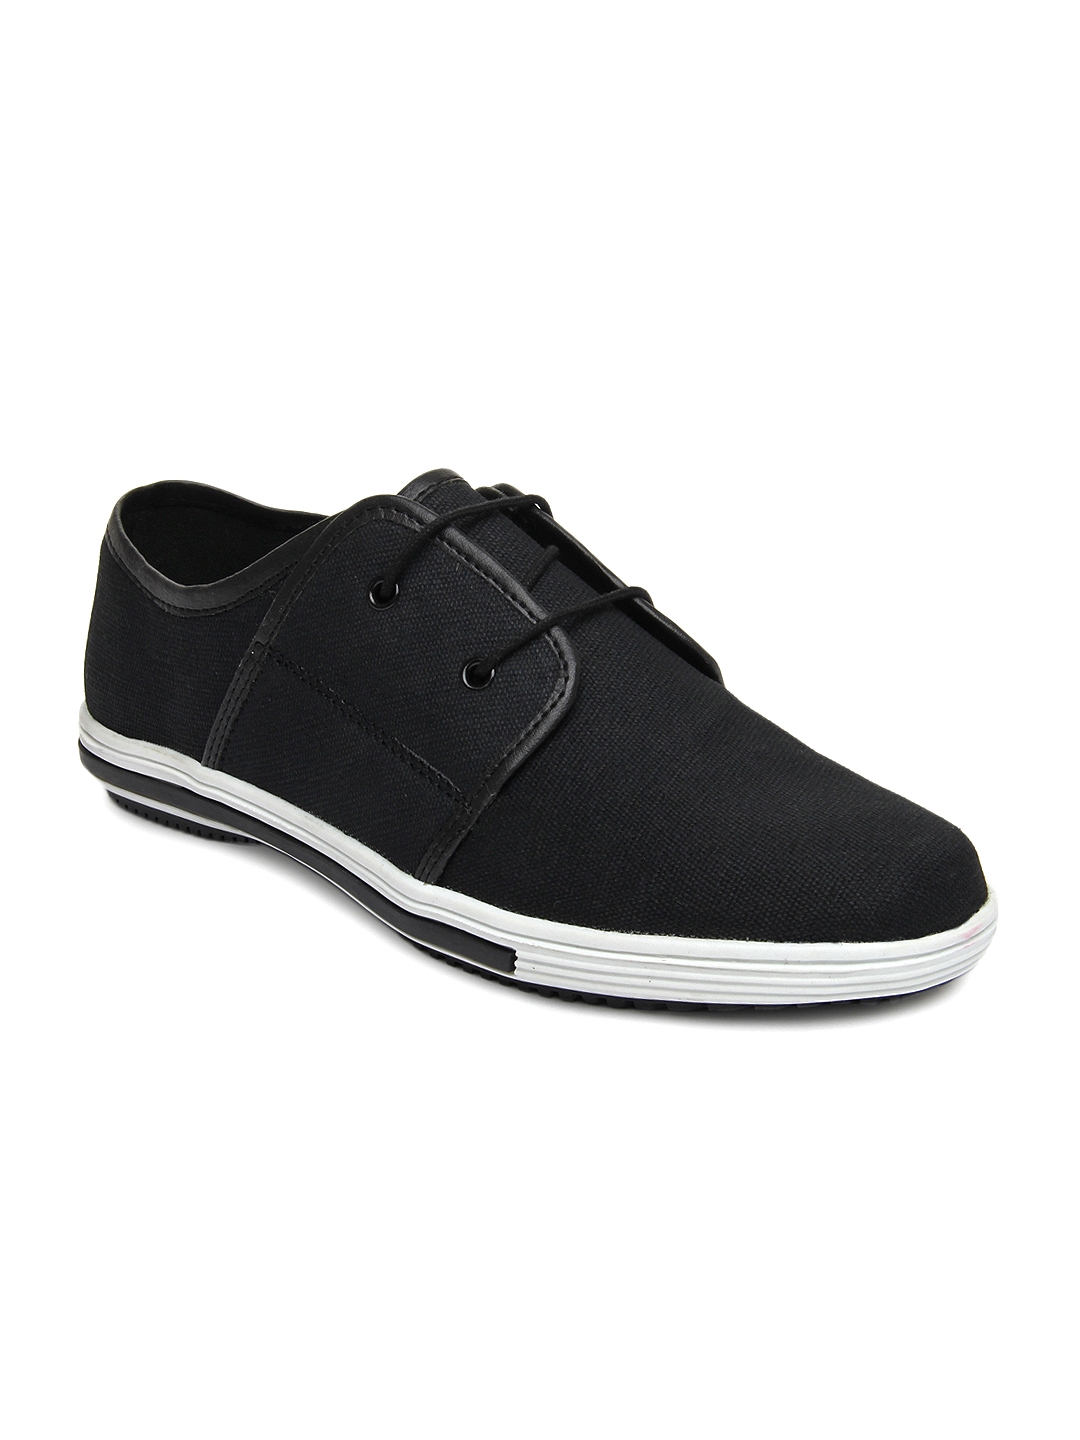 Buy Roadster Men Black Casual Shoes - Casual Shoes for Men 238558 | Myntra